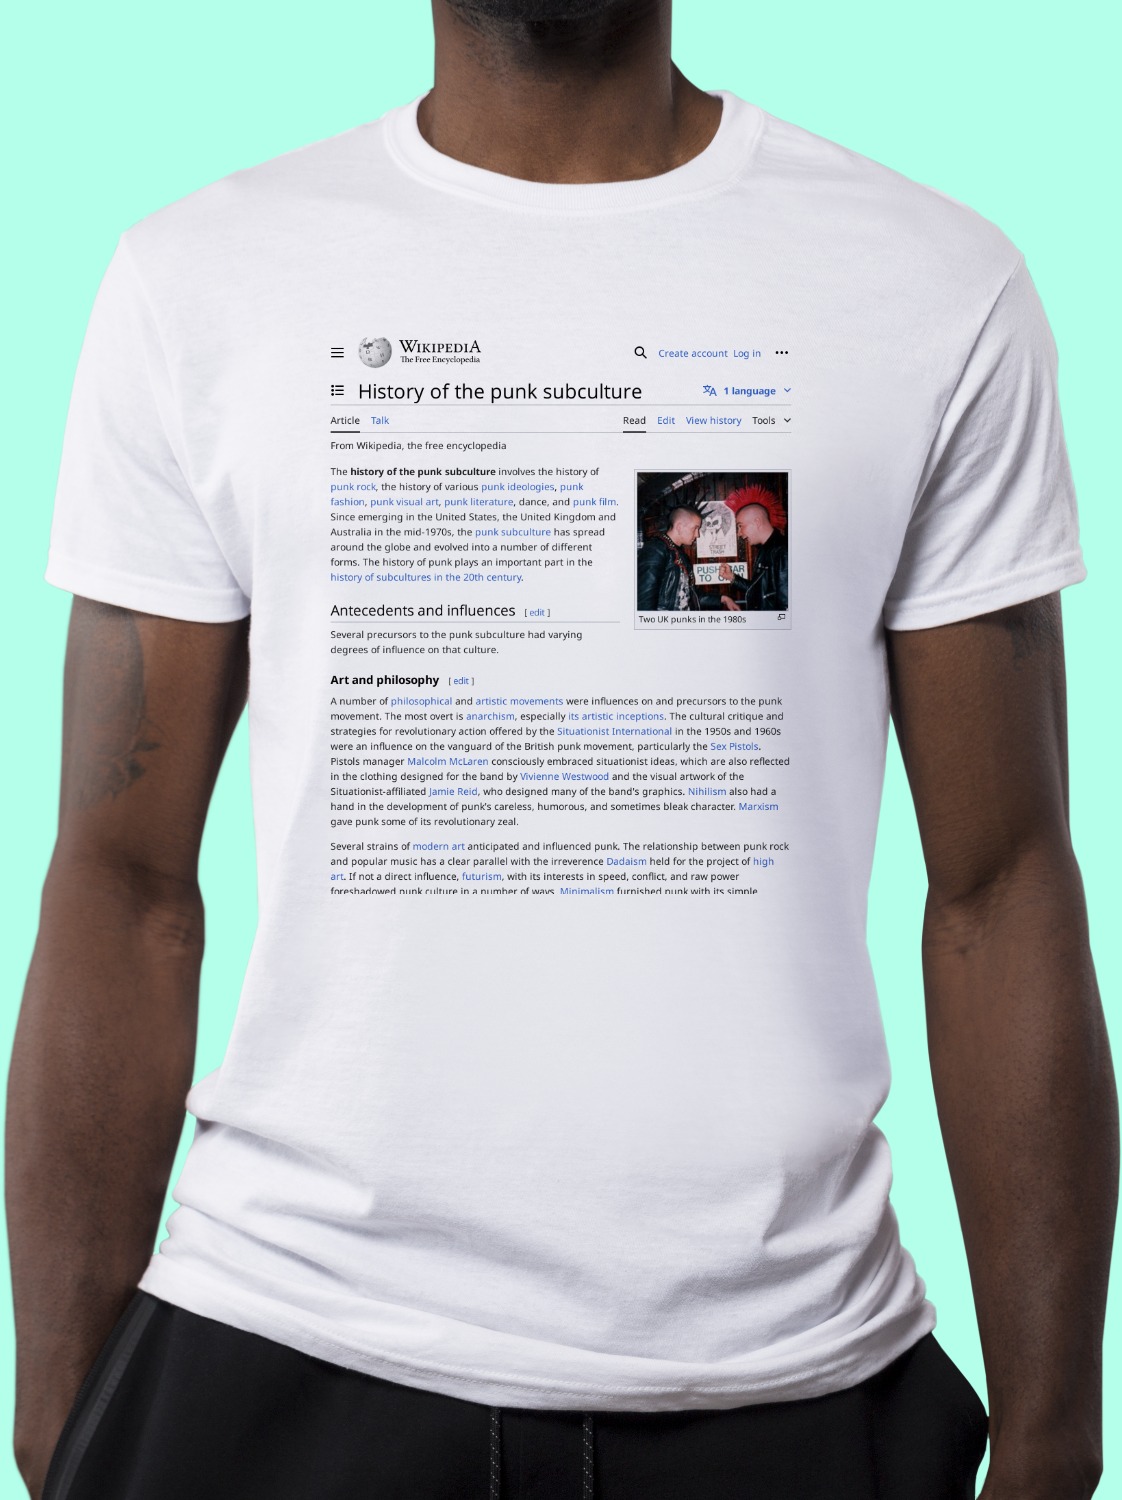 History_of_the_punk_subculture Wikipedia Shirt